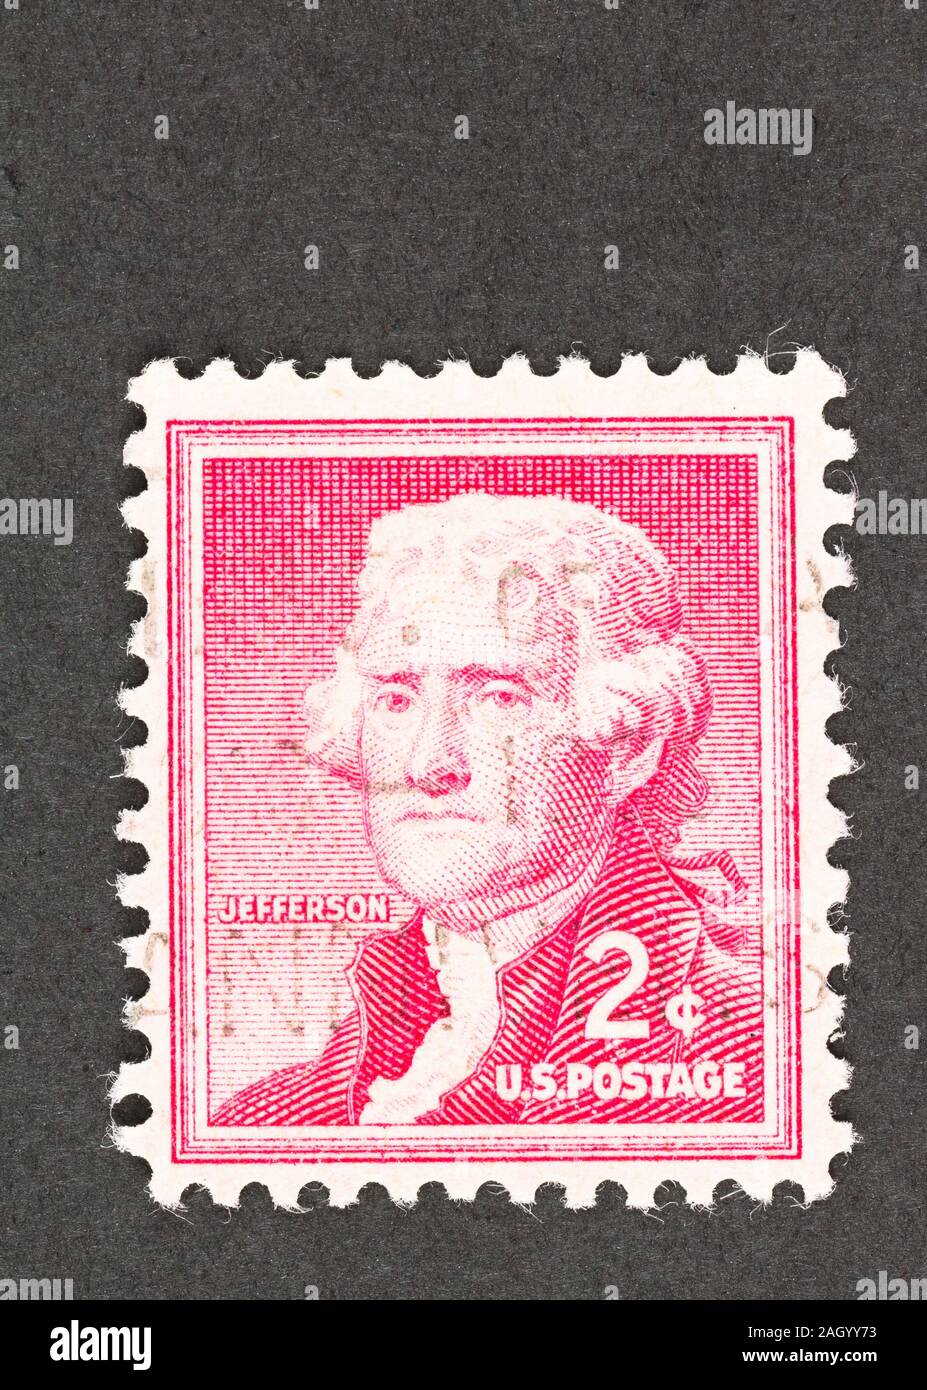 American postage stamp with former president Thomas Jefferson on red two cent definitive stamp from Liberty Issue Stock Photo